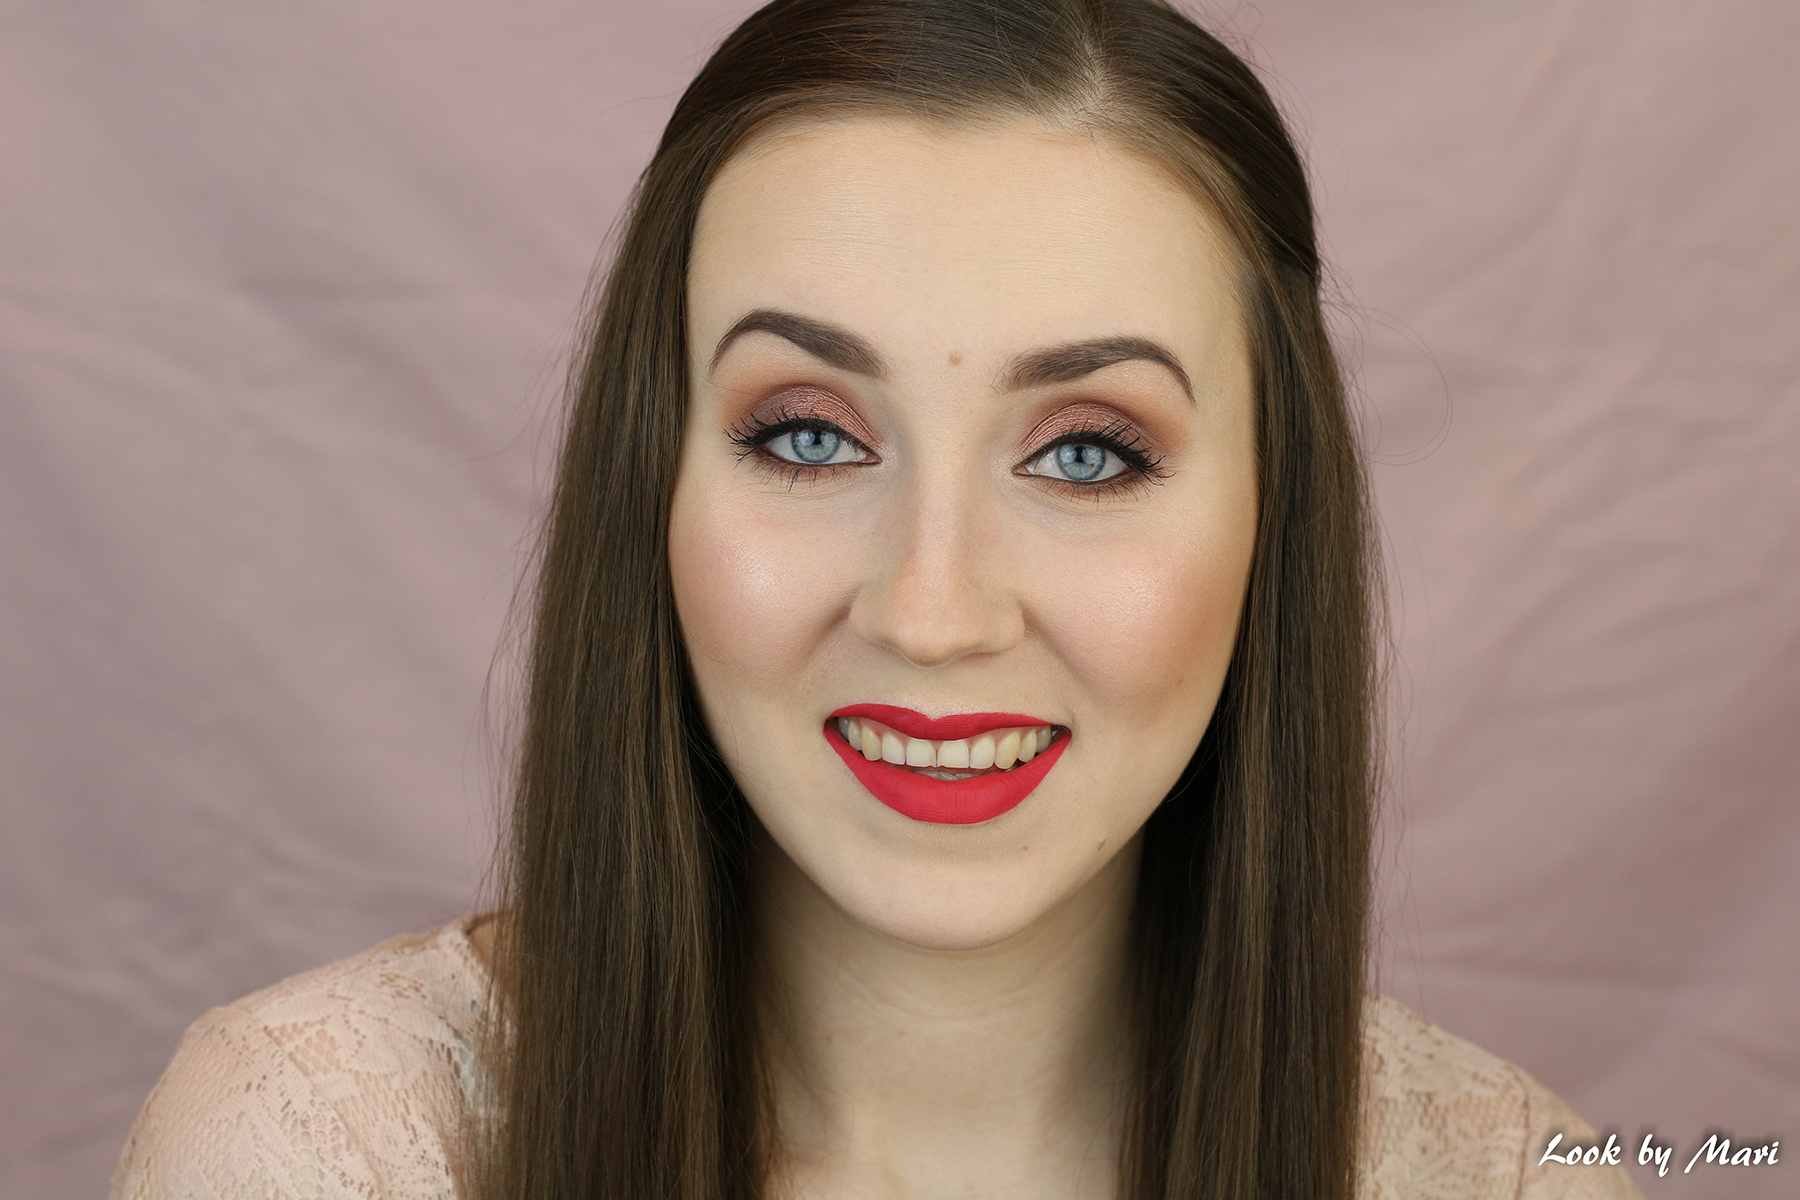 1 estee lauder double wear stay-in-place foundation review 1N1 Ivory Nude swatch swatches on the skin on pale skin